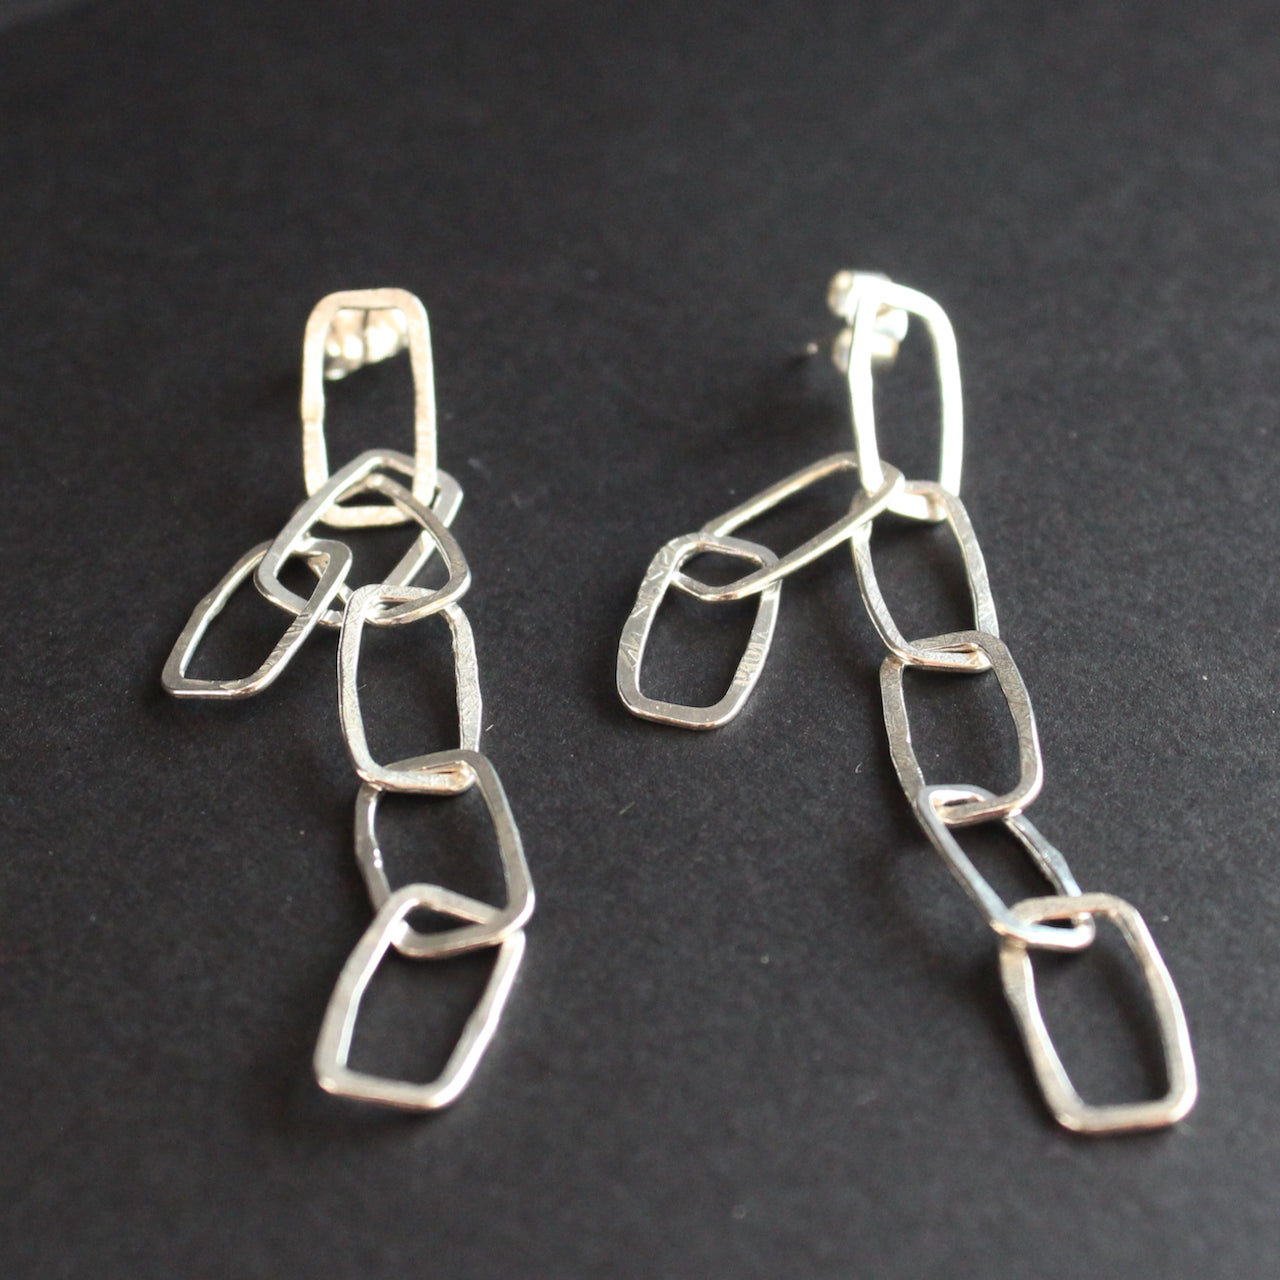 Silver mini monolith shape chain earrings by Cornish artist Lucy Spink.